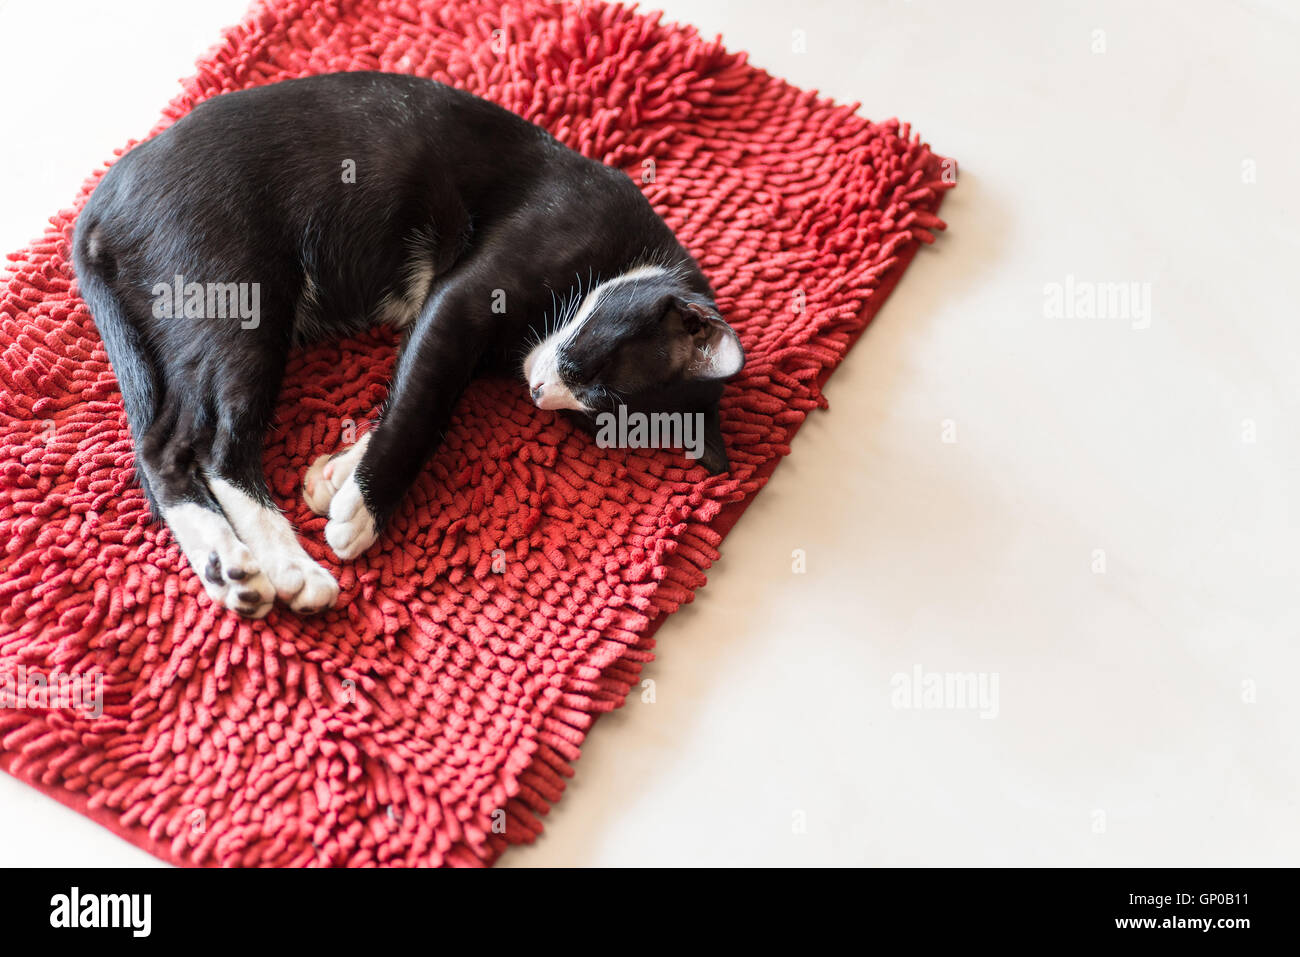 cat sleeping on red carpet, copy space. Stock Photo